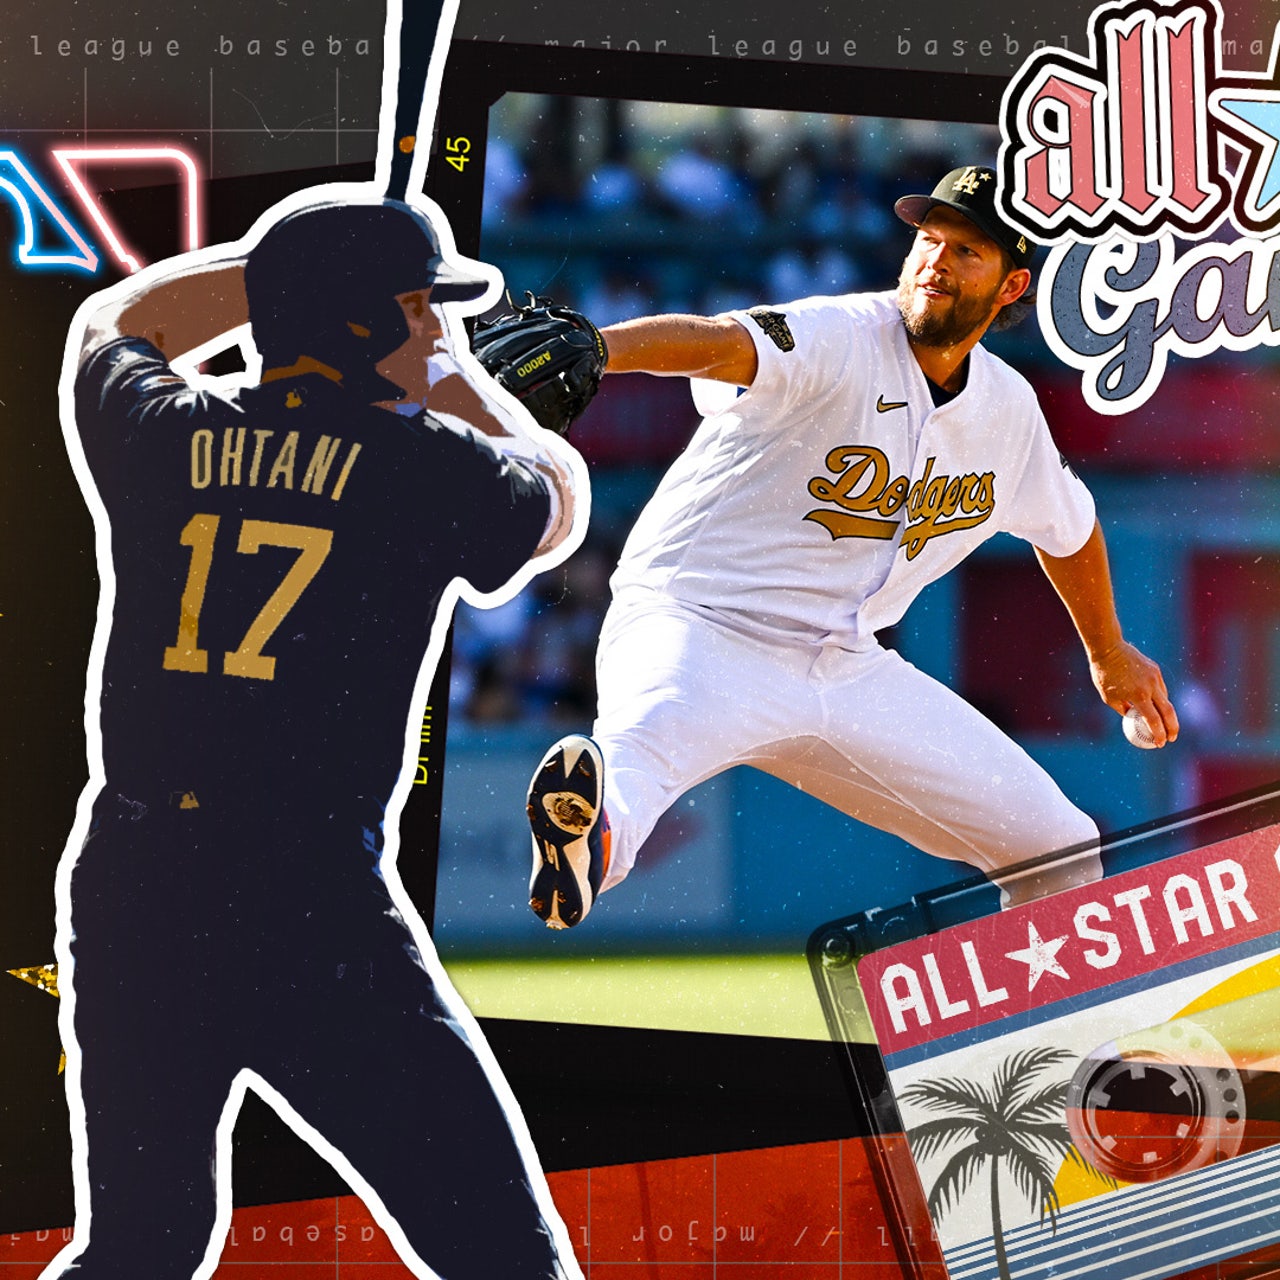 MLB All-Star Game 2022: AL edges NL for 9th straight victory